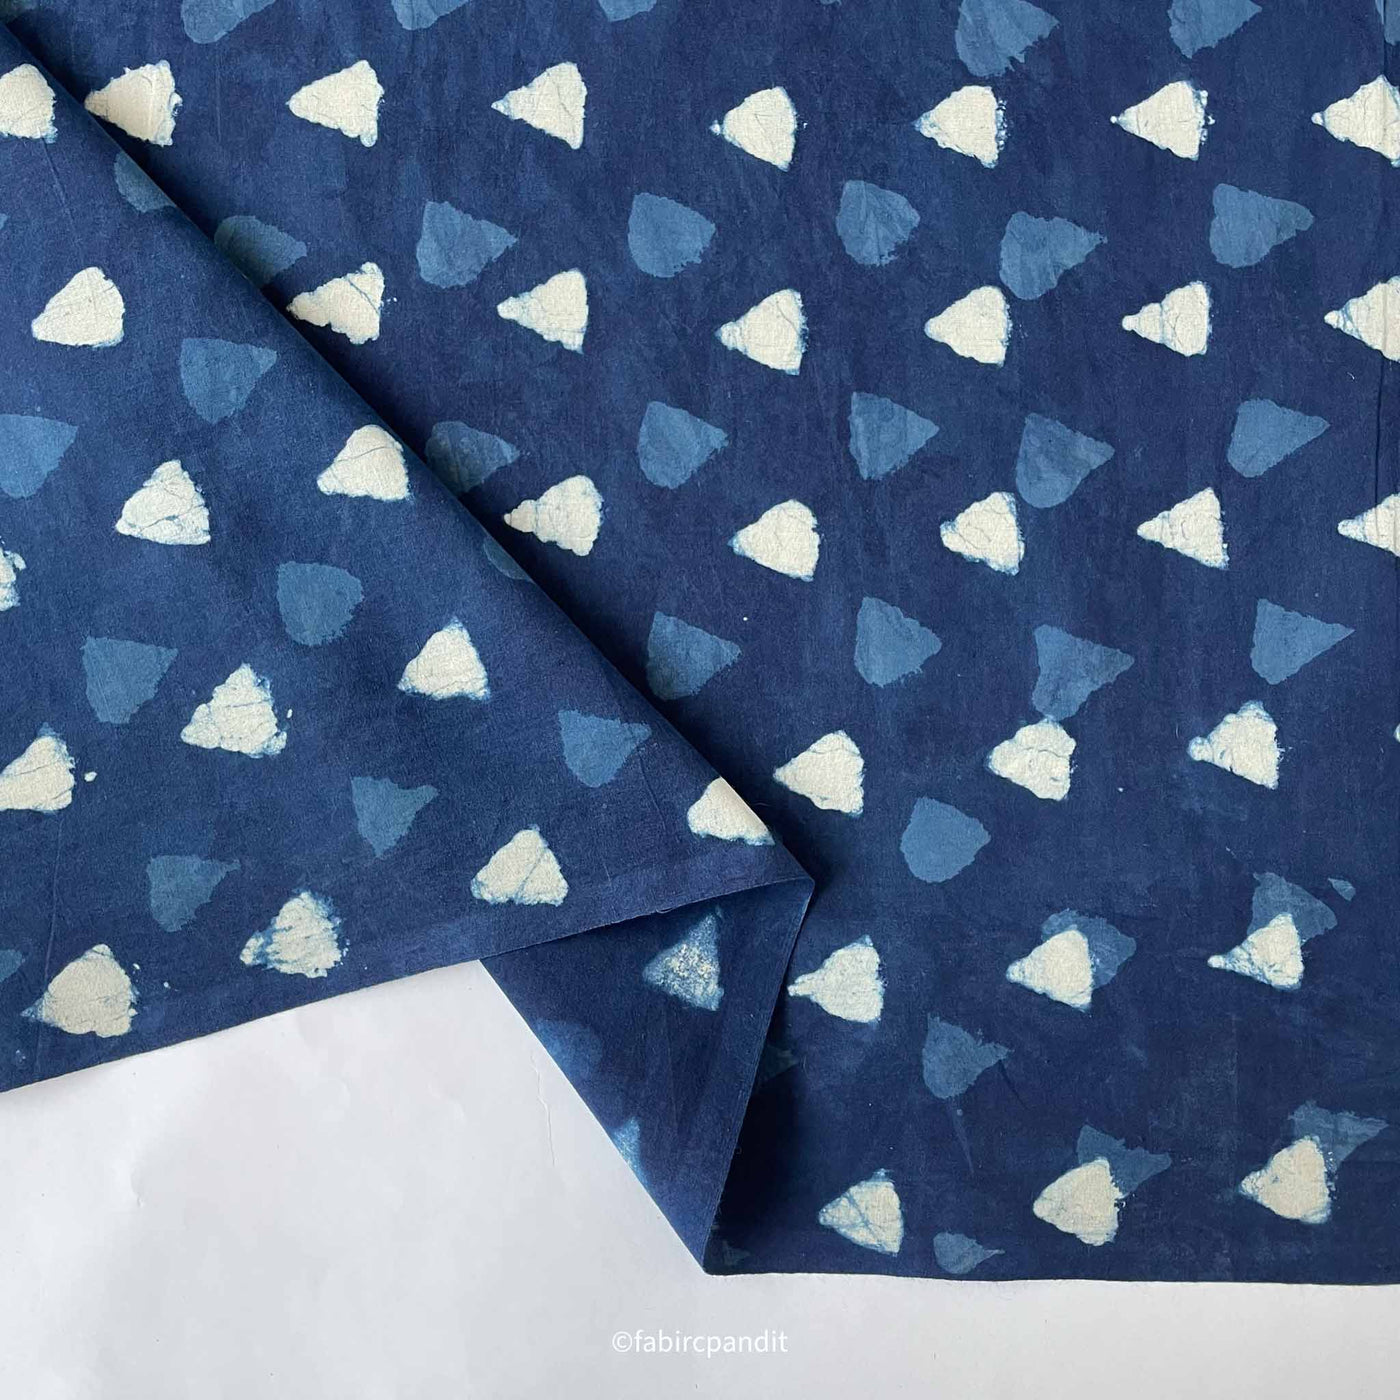 Fabric Pandit Cut Piece (CUT PIECE) Indigo Dabu Natural Dyed White and Blue Triangles Hand Block Printed Pure Cotton Fabric (Width 43 inches)